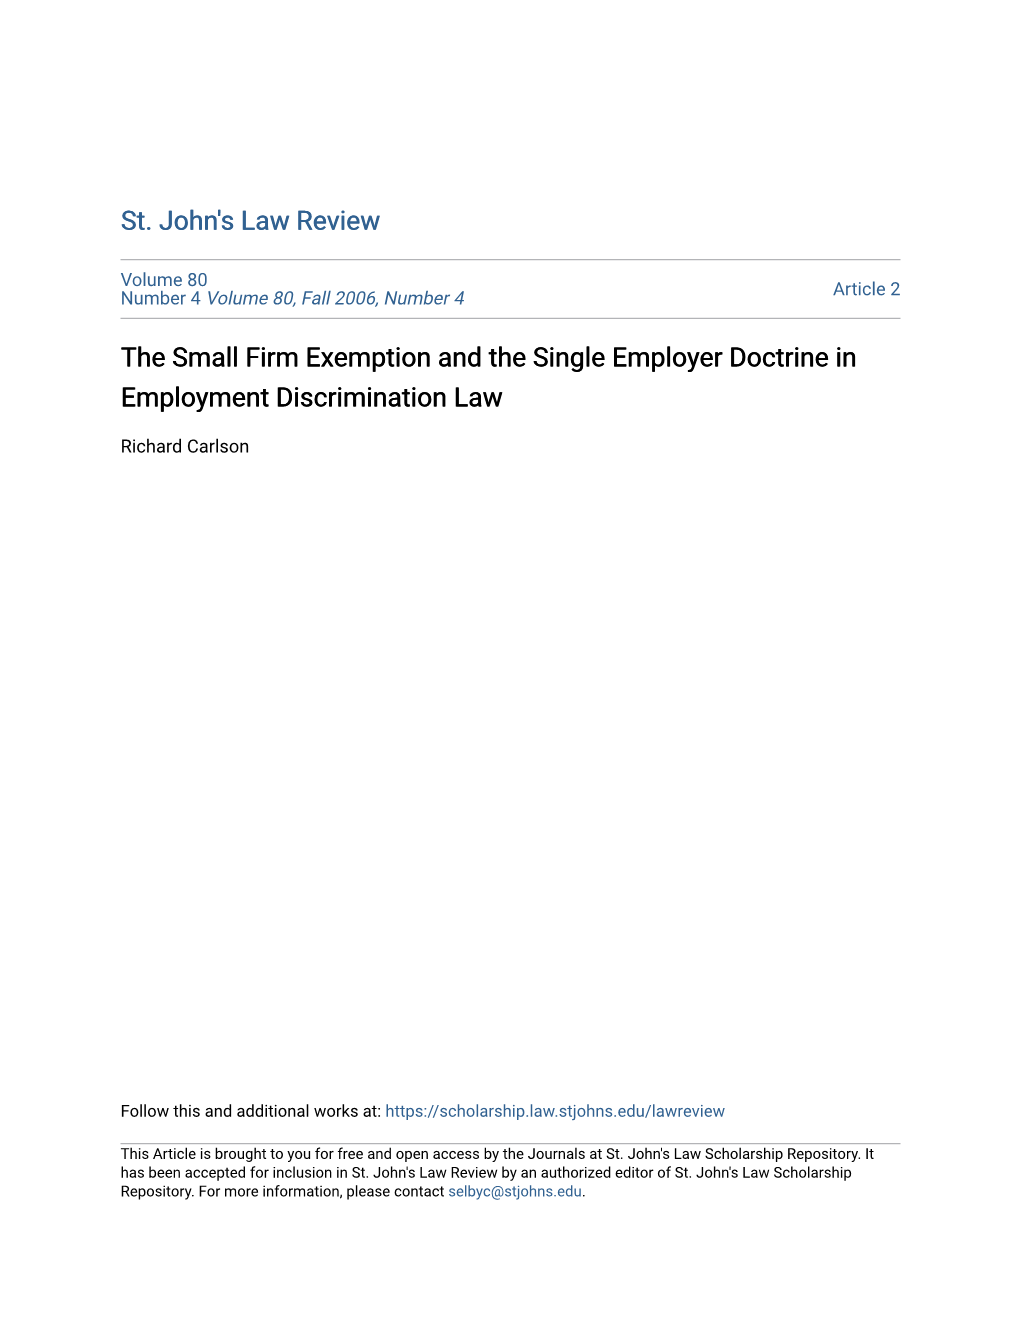 The Small Firm Exemption and the Single Employer Doctrine in Employment Discrimination Law